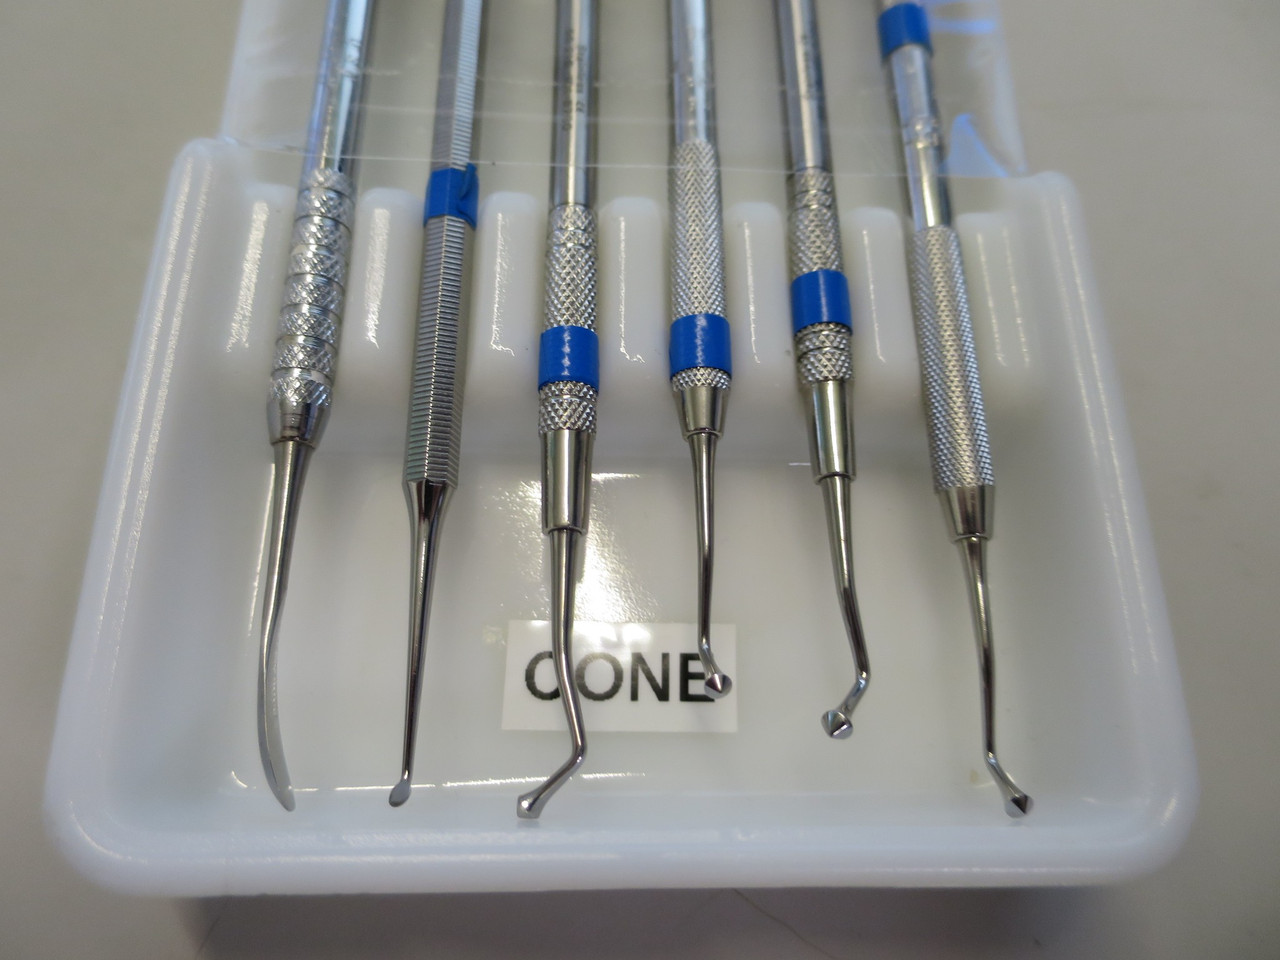 Set of 6 Stainless Steel Dental Cone Instruments in Antique Milk Glass Tray